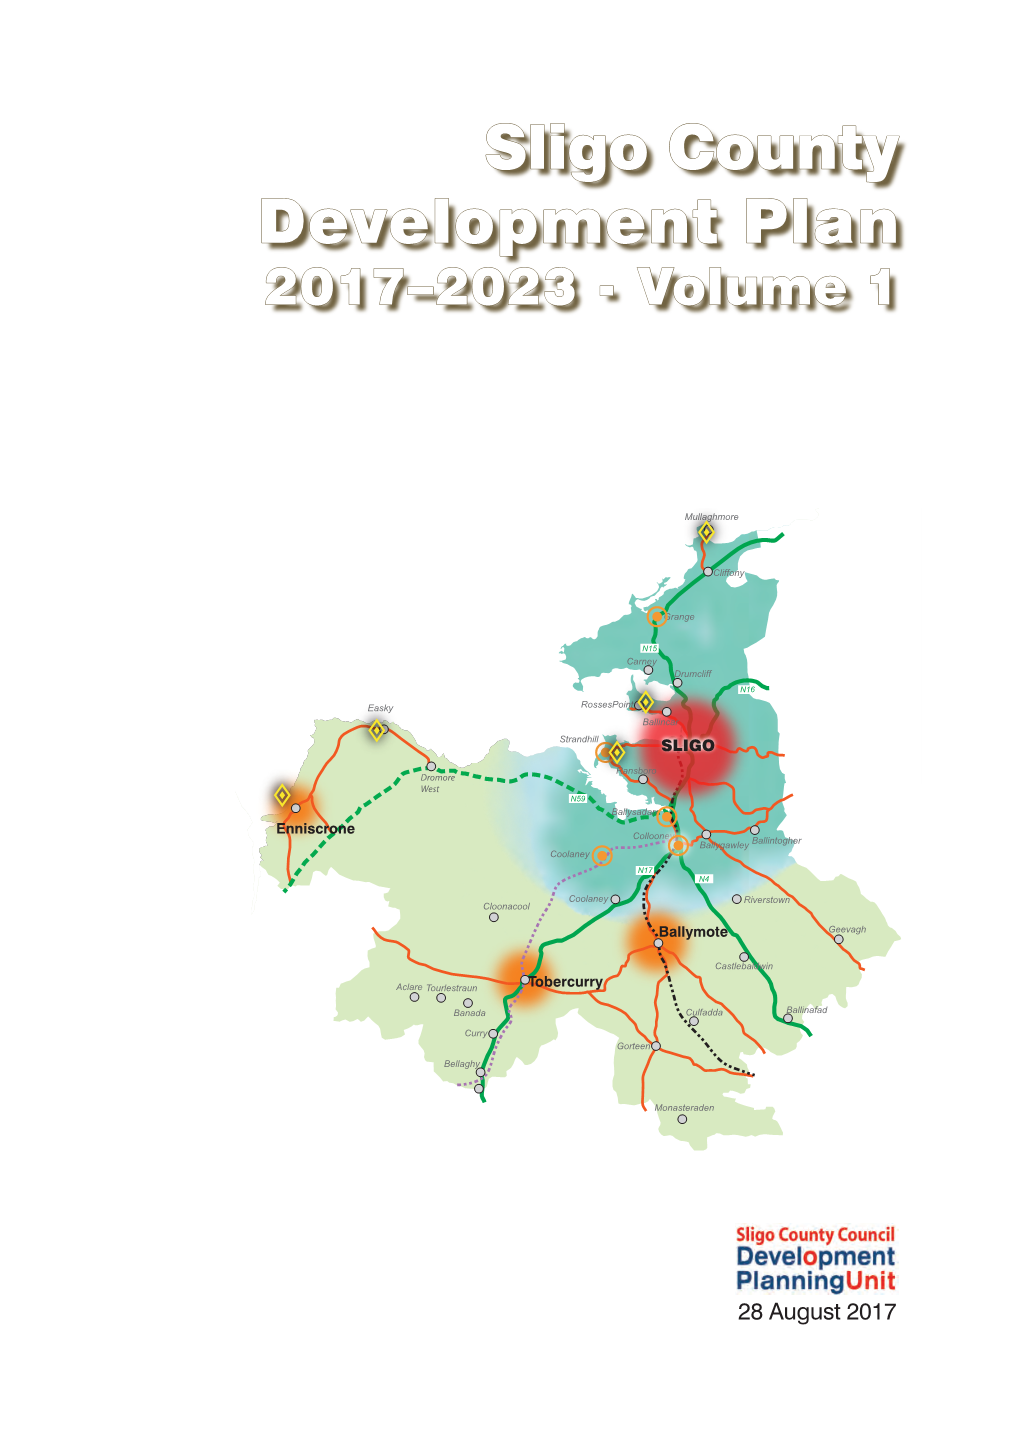 Sligo County Development Plan 2017-2023 Consolidated Draft + Adopted Amendments – August 2017 Volume 1, Chapter 1 – Introduction